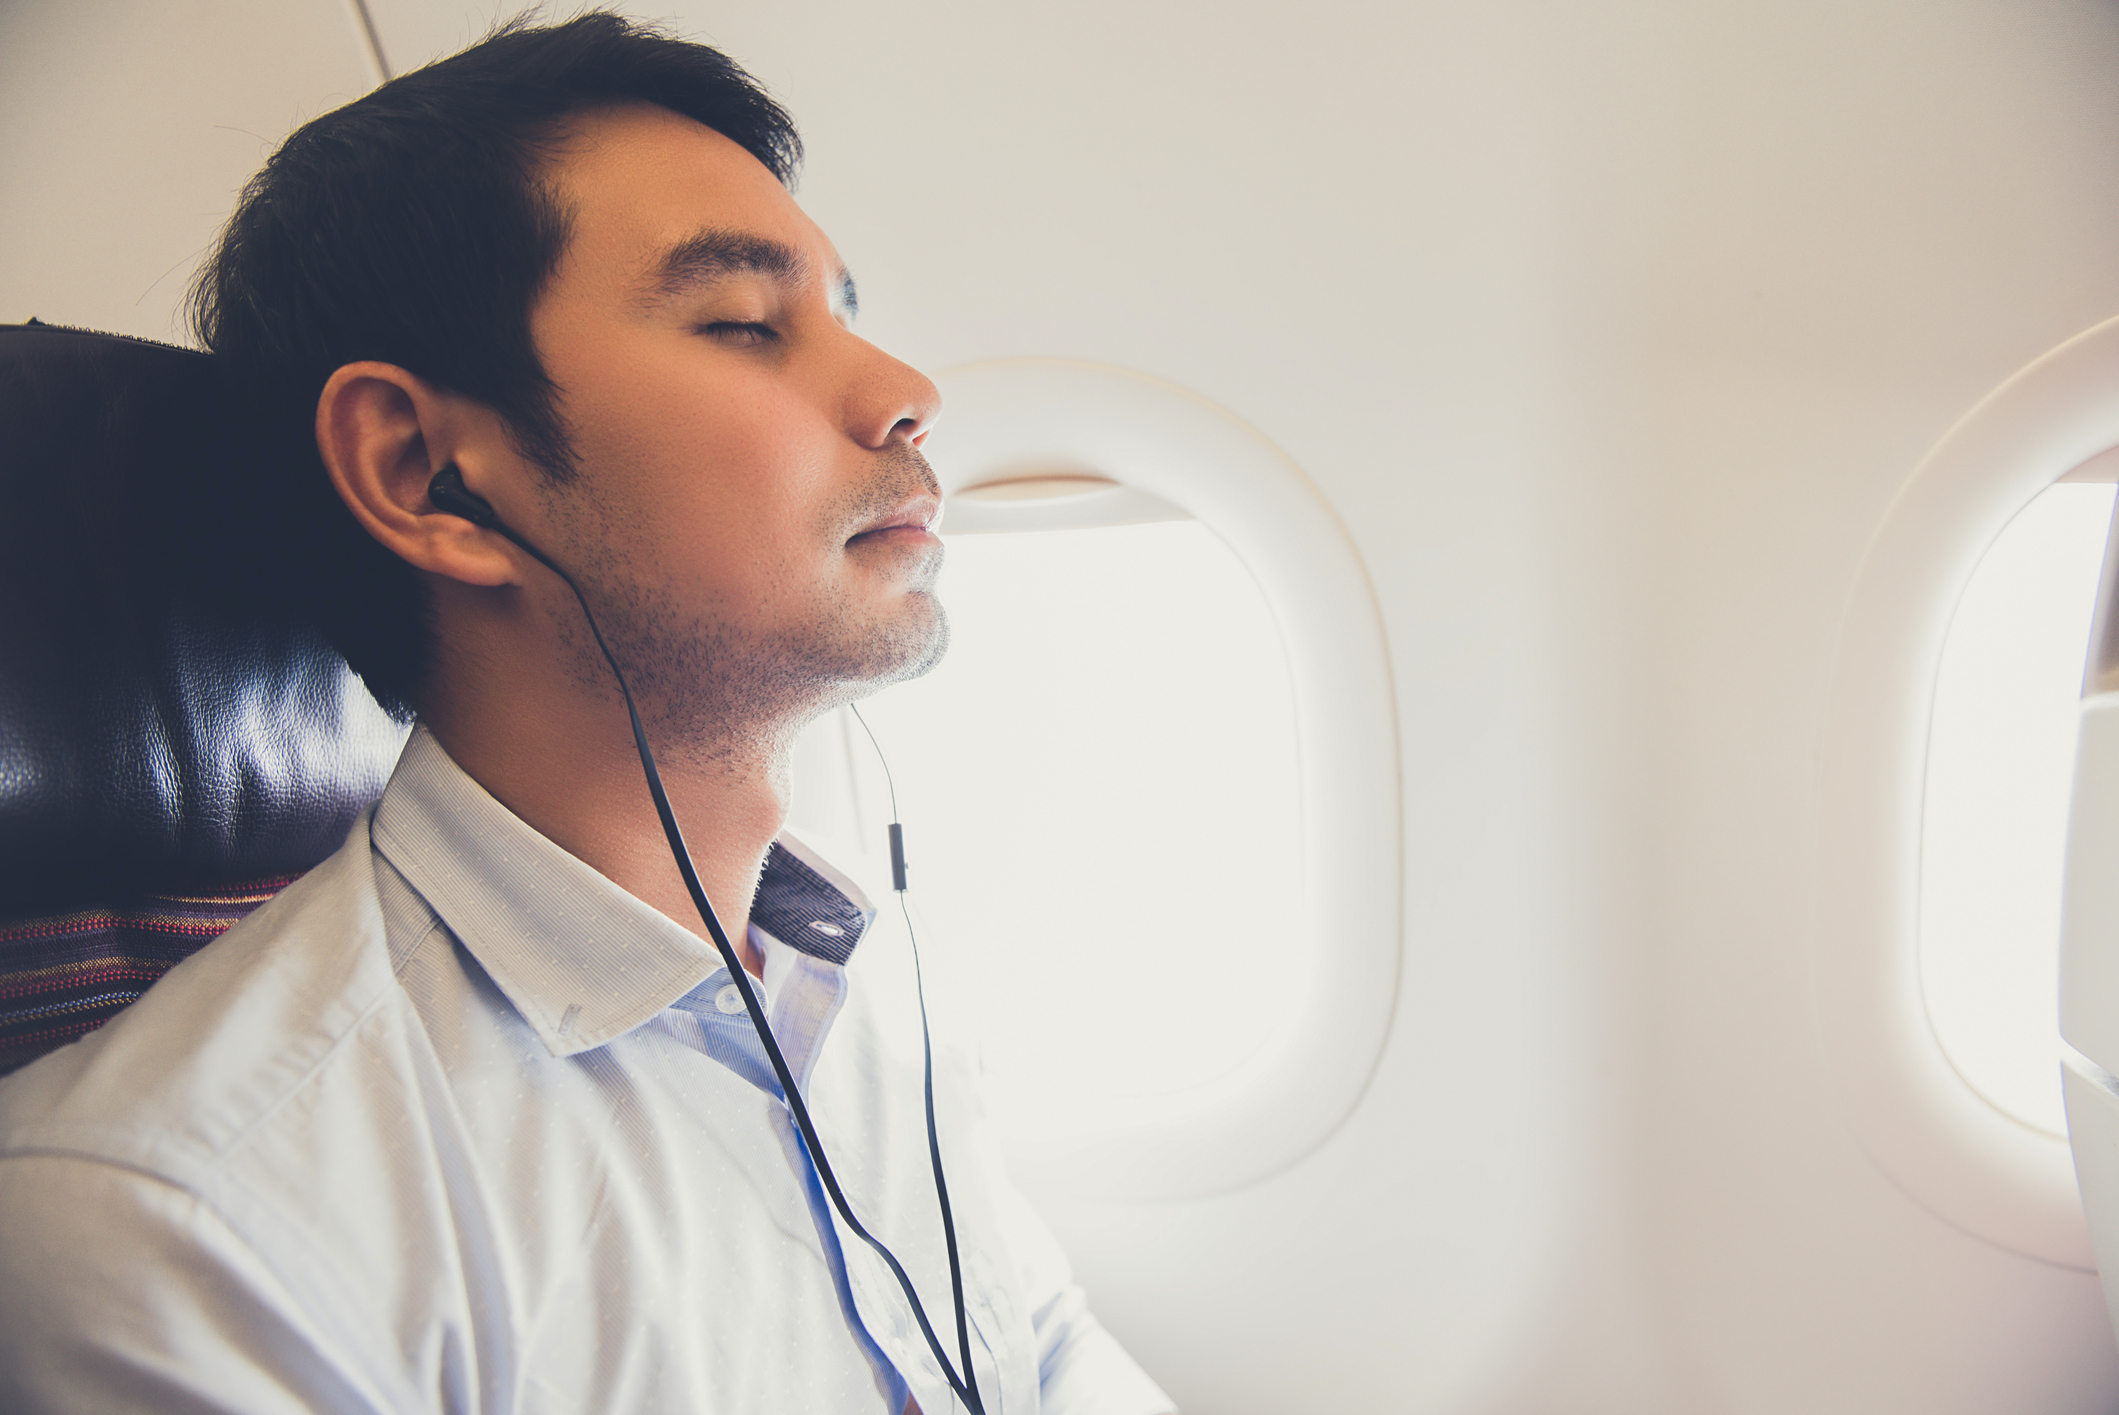 "Panic attack treatment". Young man relaxing with headphones with eyes closed during a flight.